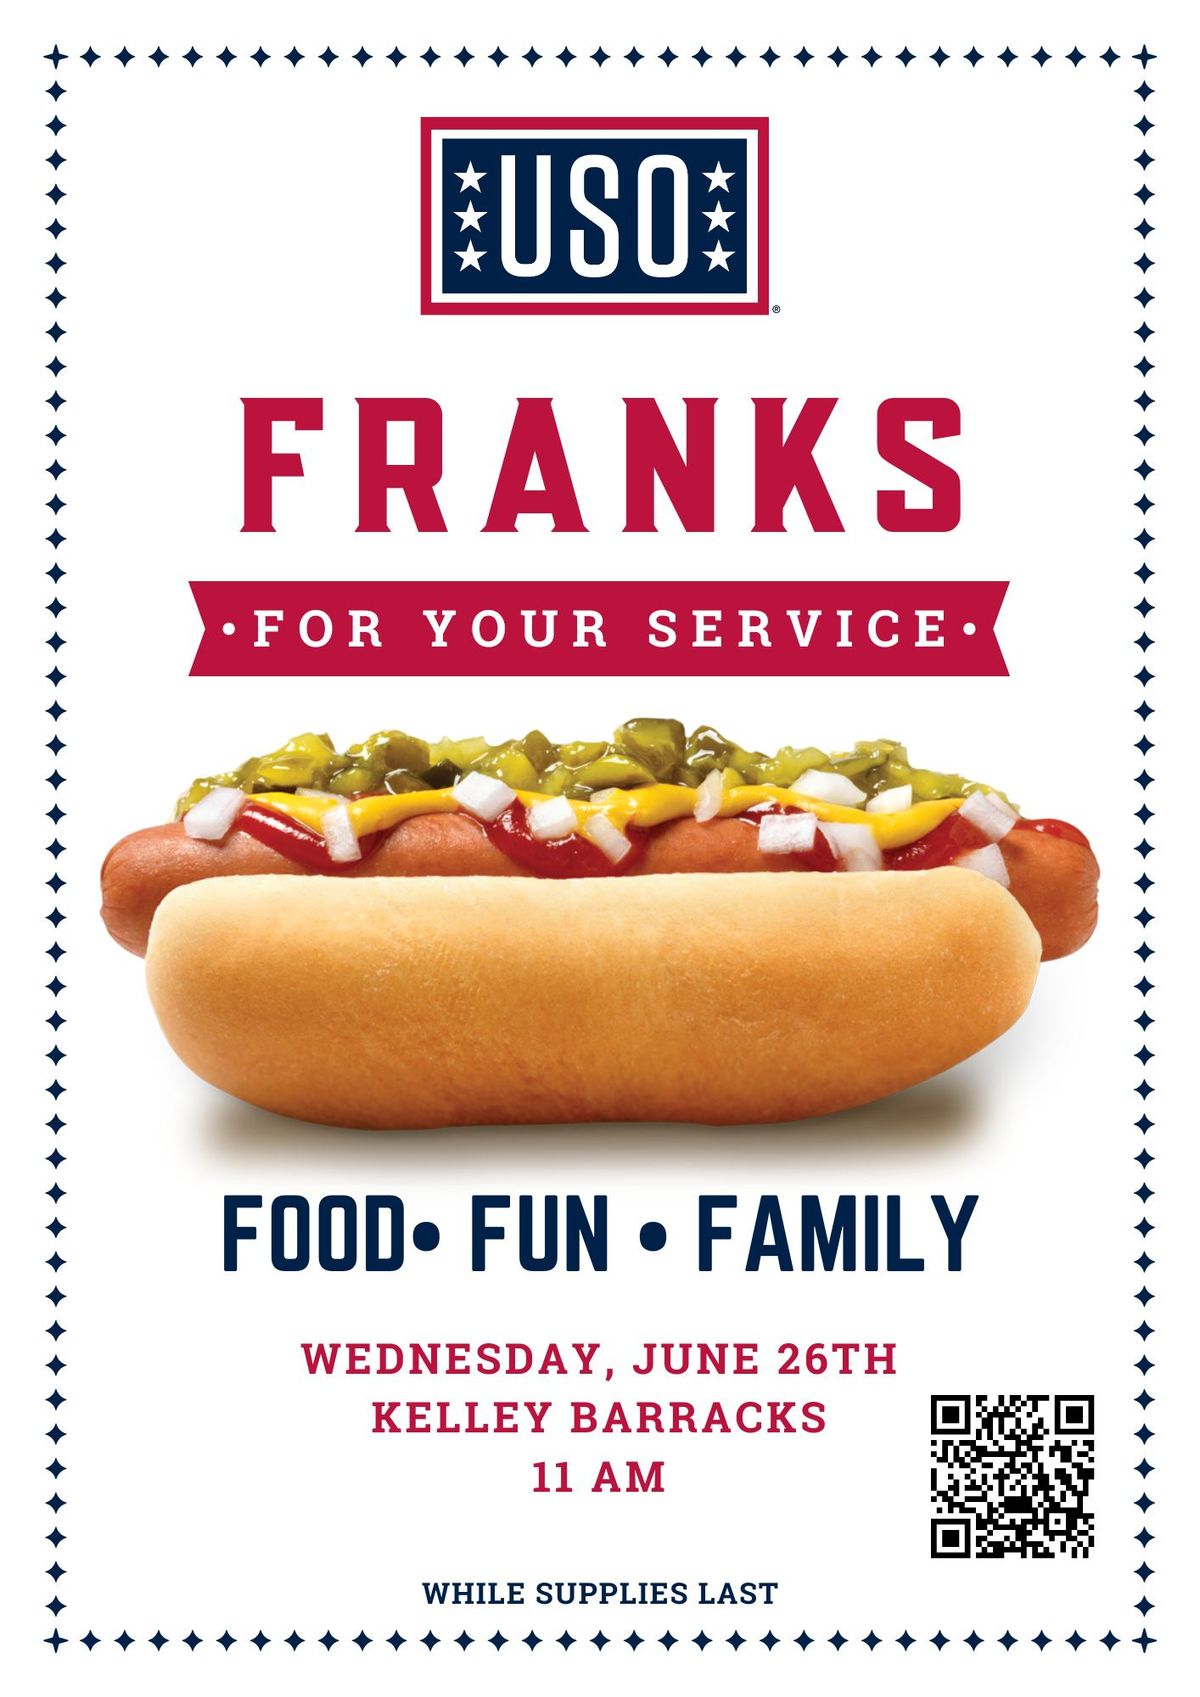 Franks For Your Service - Kelley